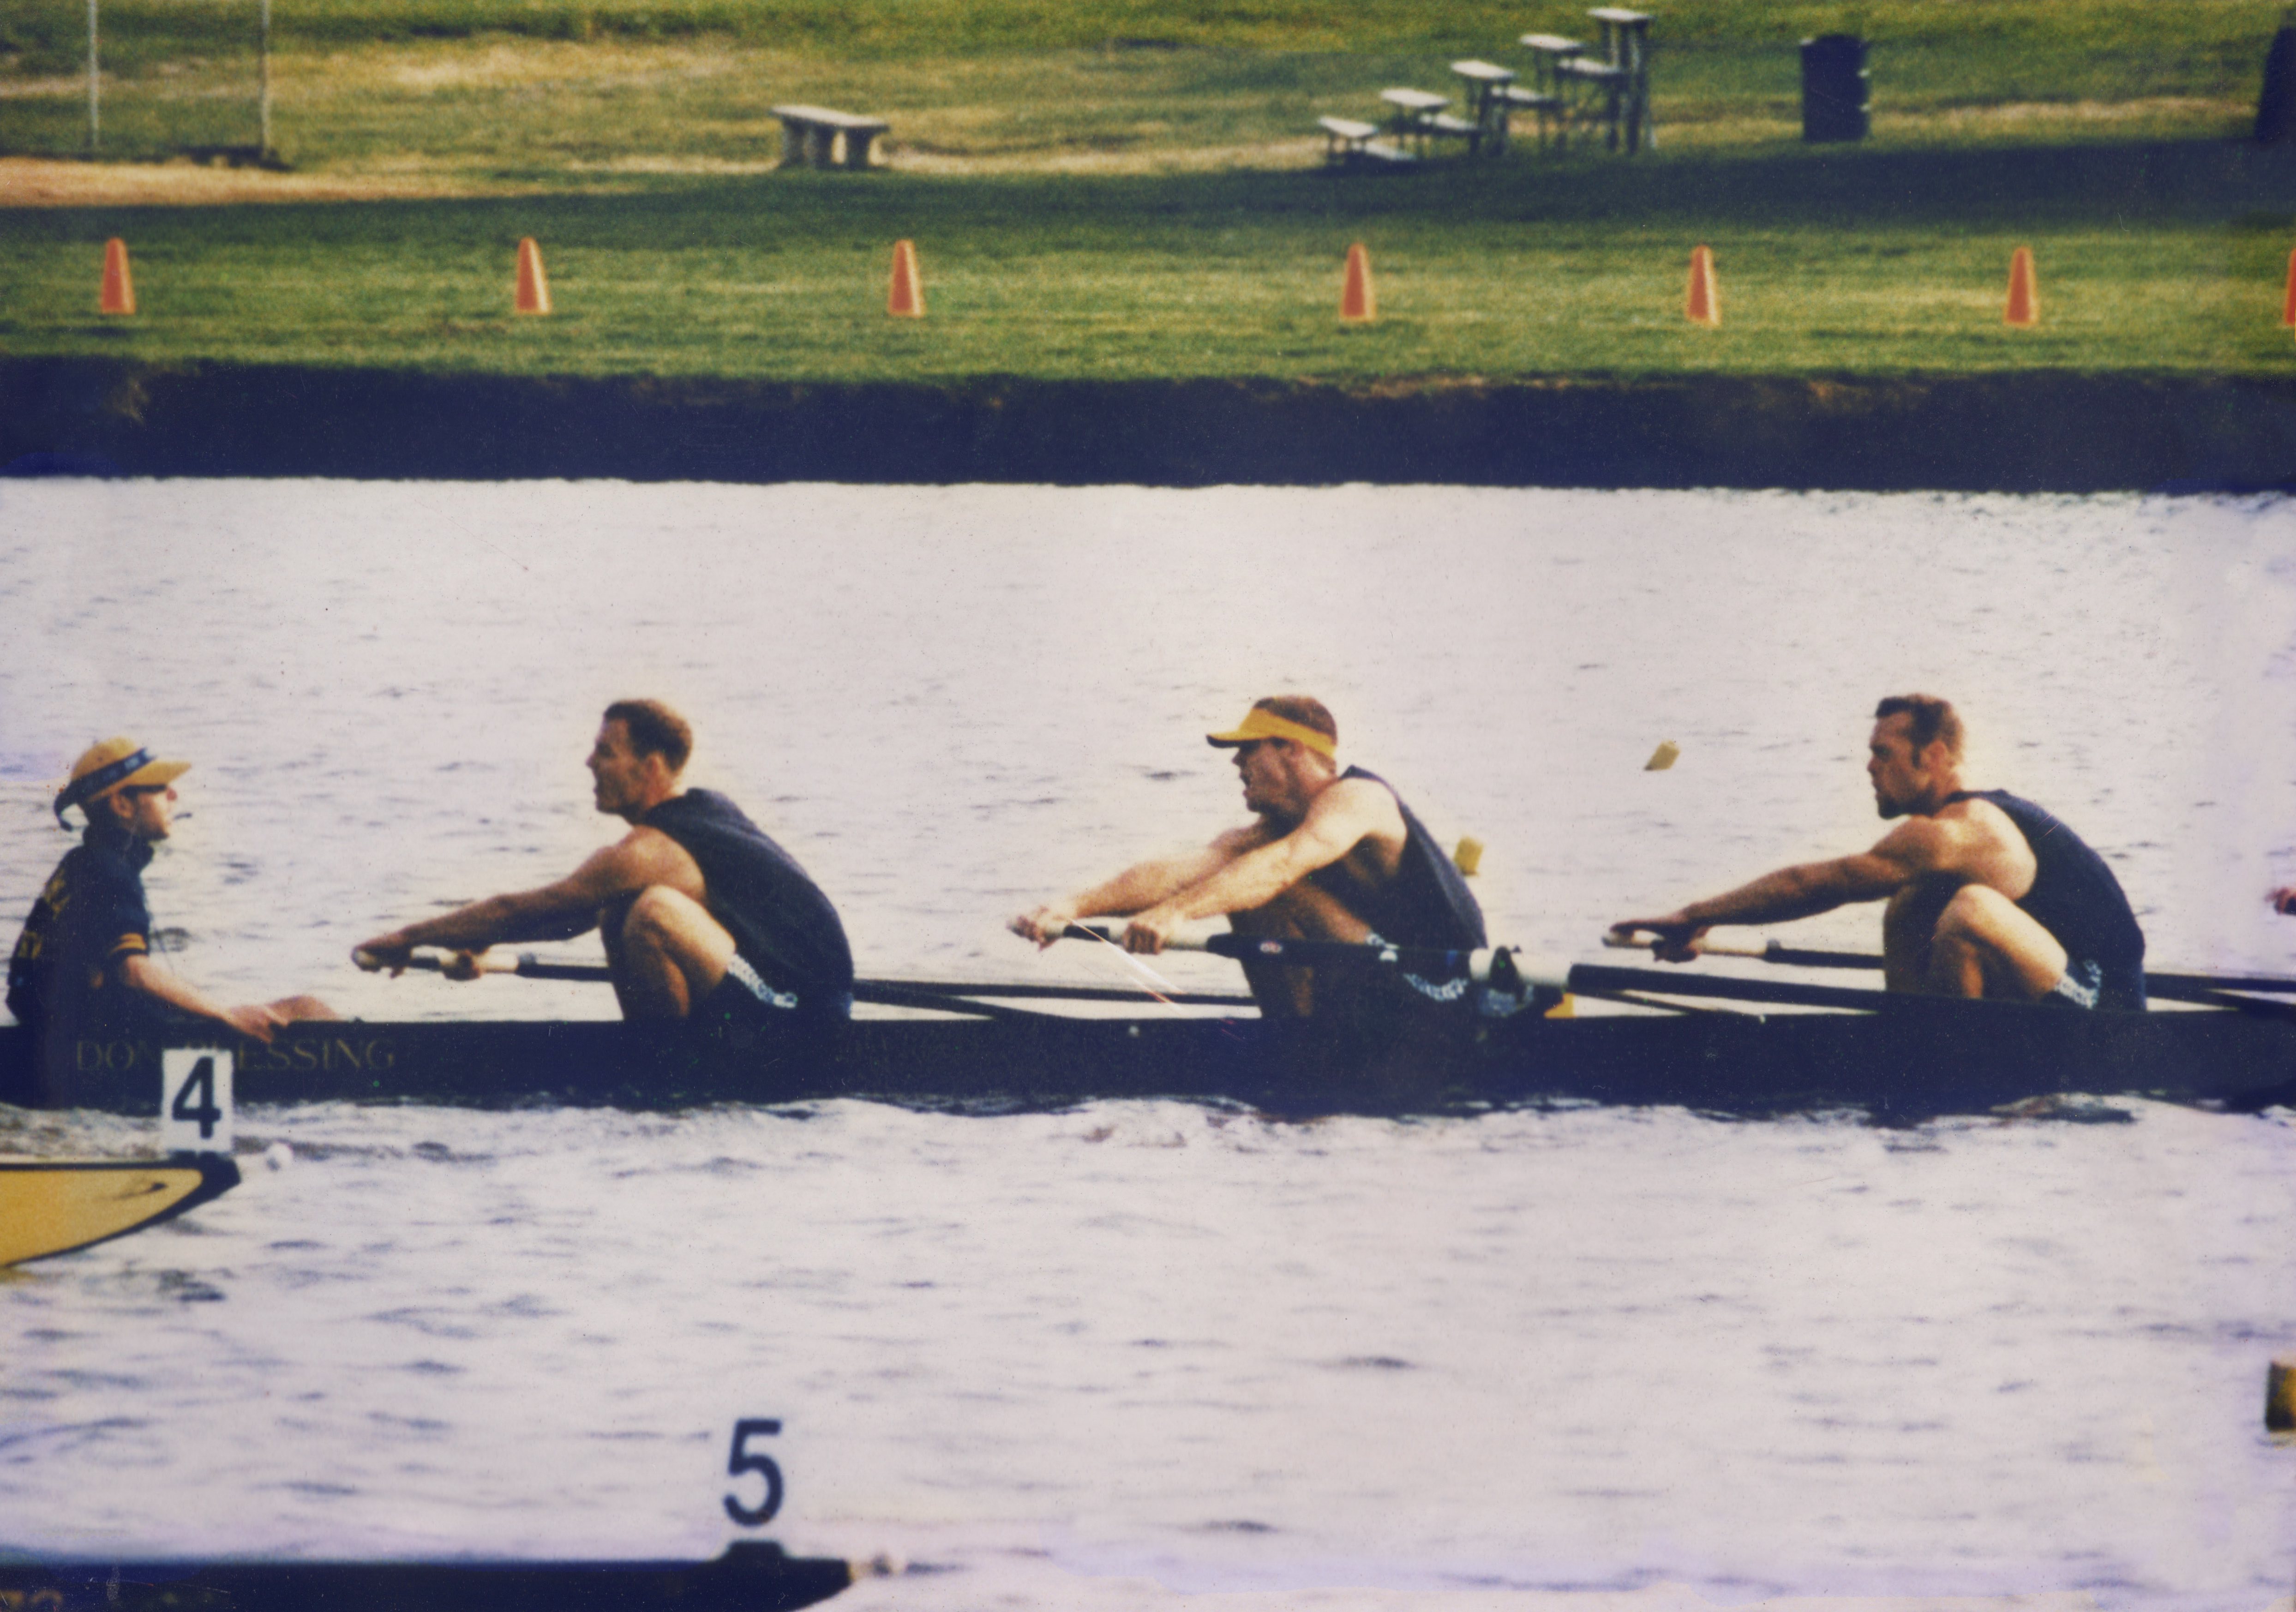 Luke Walton, RA Founder – What Does Rowing Mean to Me?